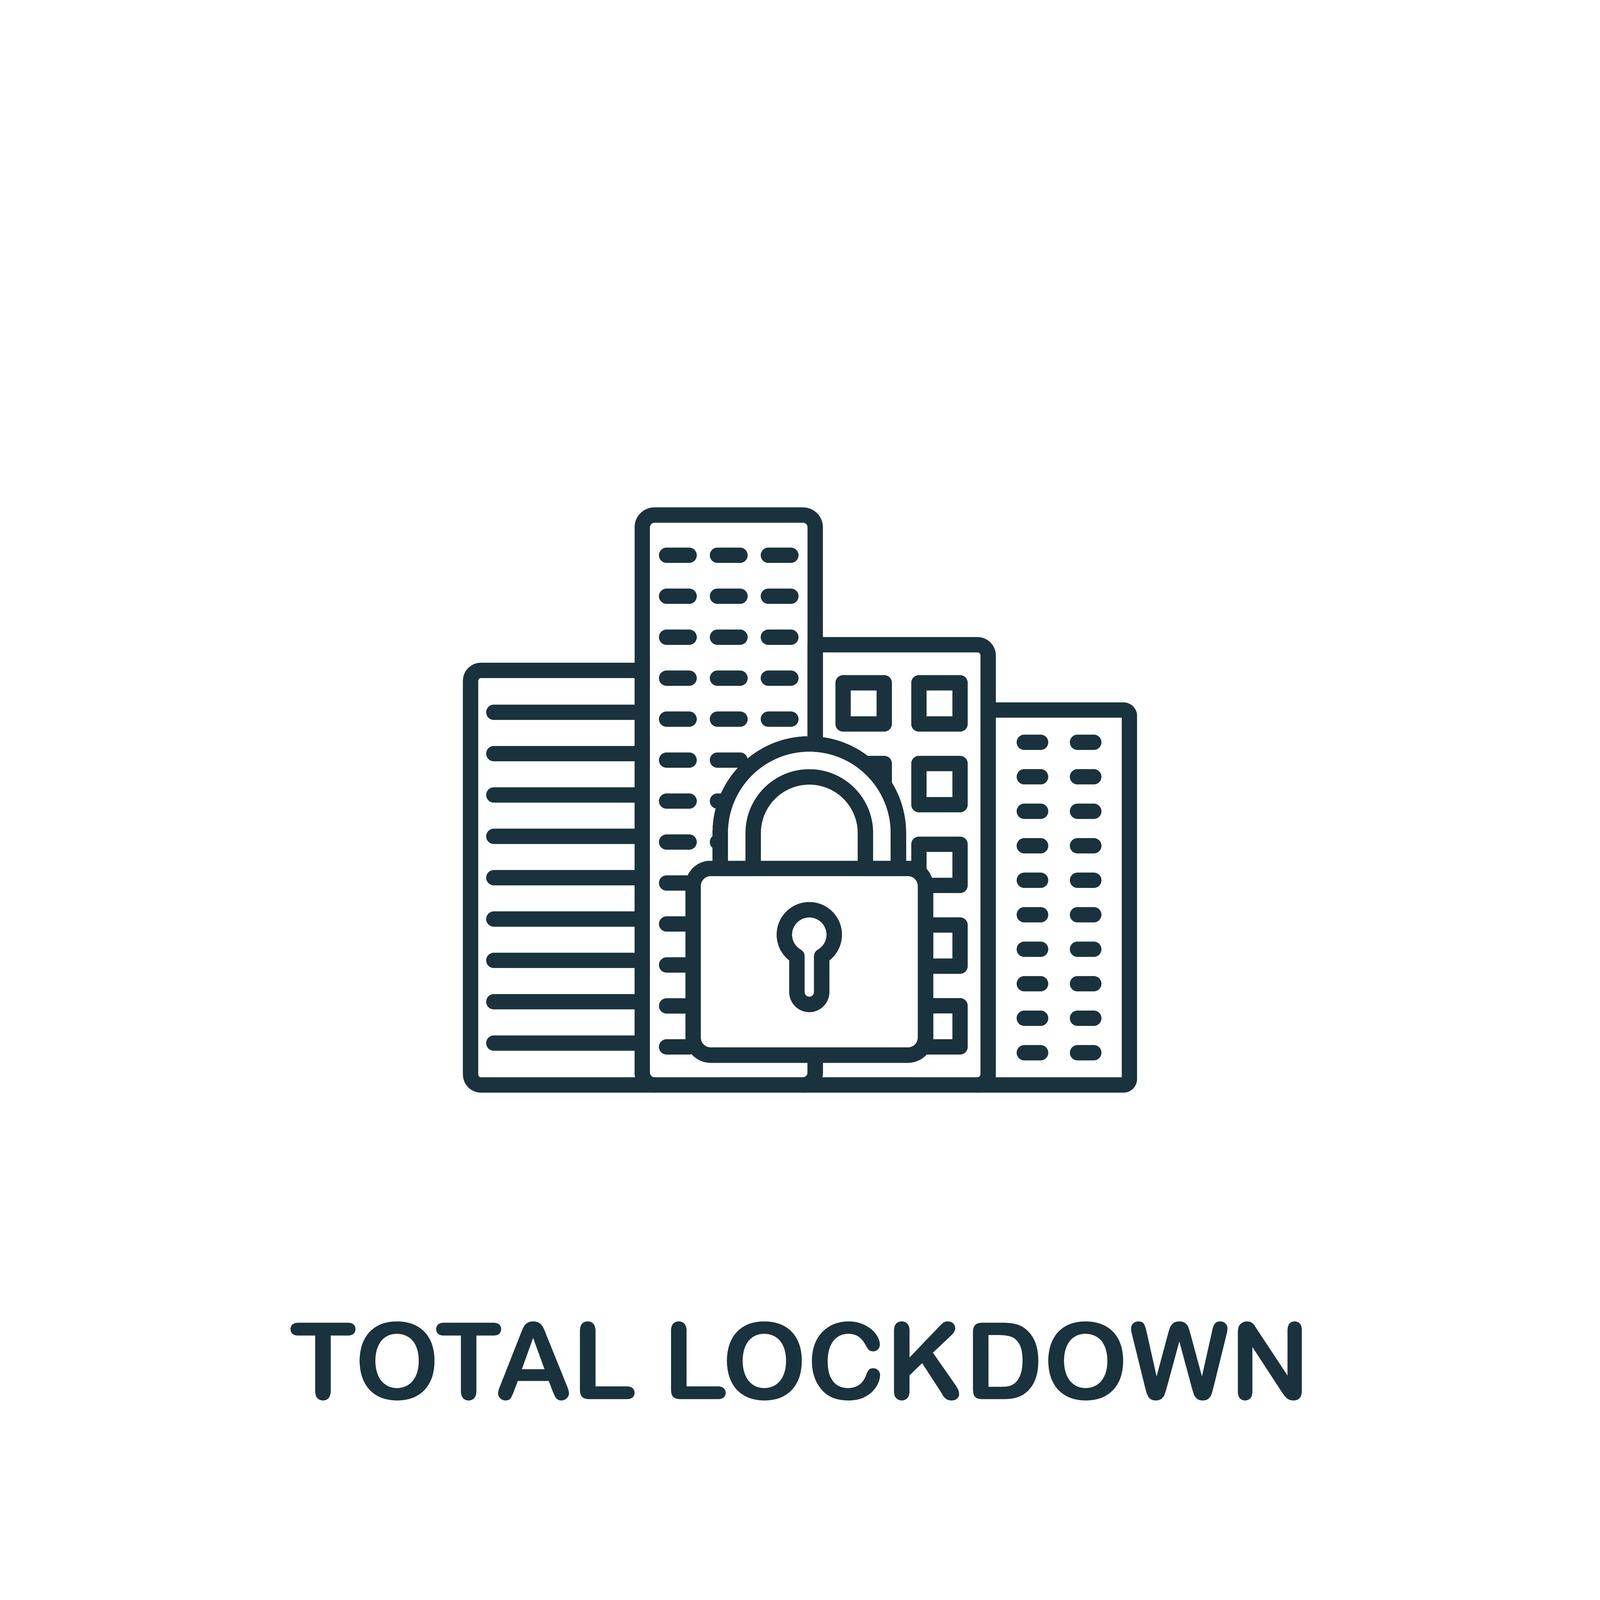 Total Lockdown icon. Simple line element quarantine symbol for templates, web design and infographics..